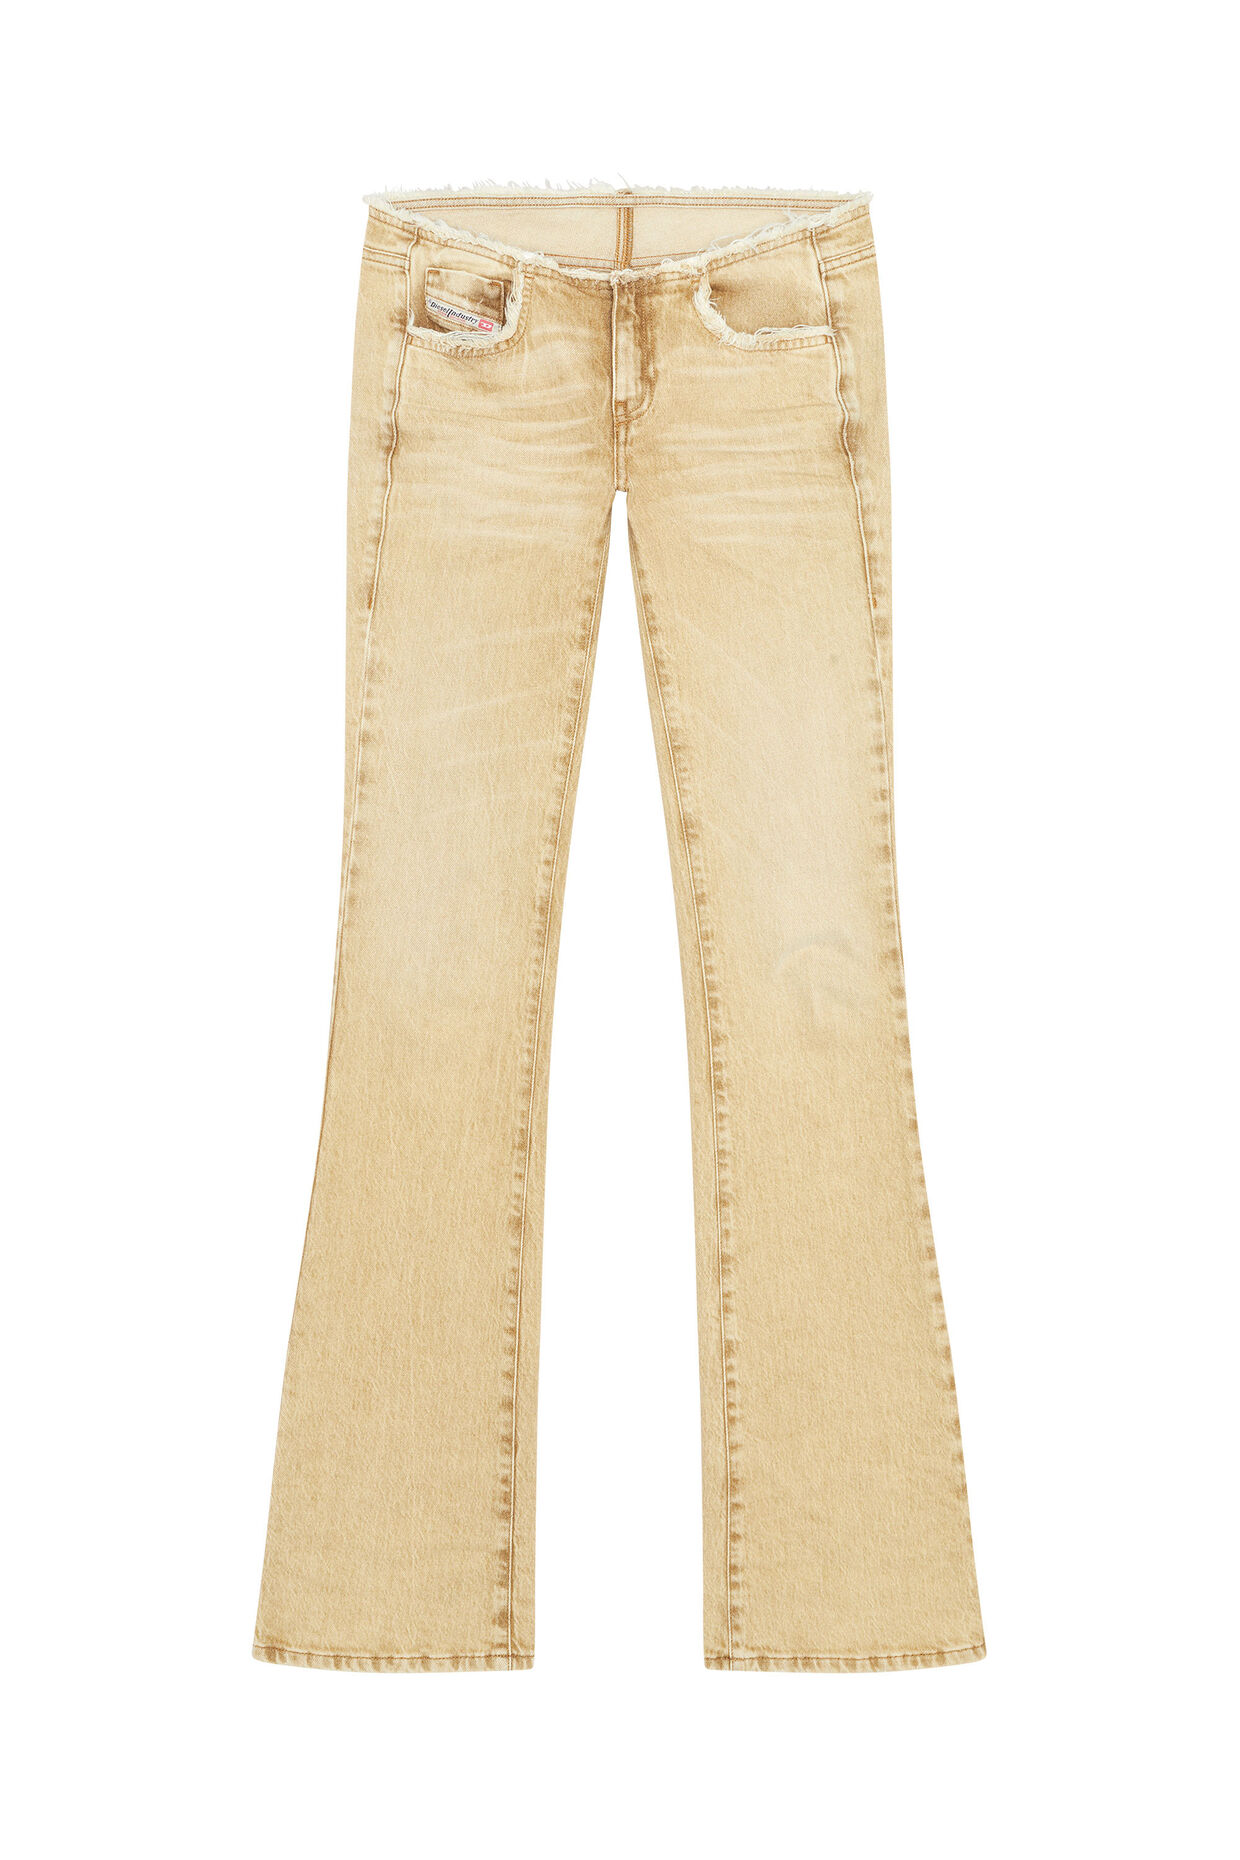 diesel.com | Bootcut And Flare Jeans 1969 D-Ebbey 09g94